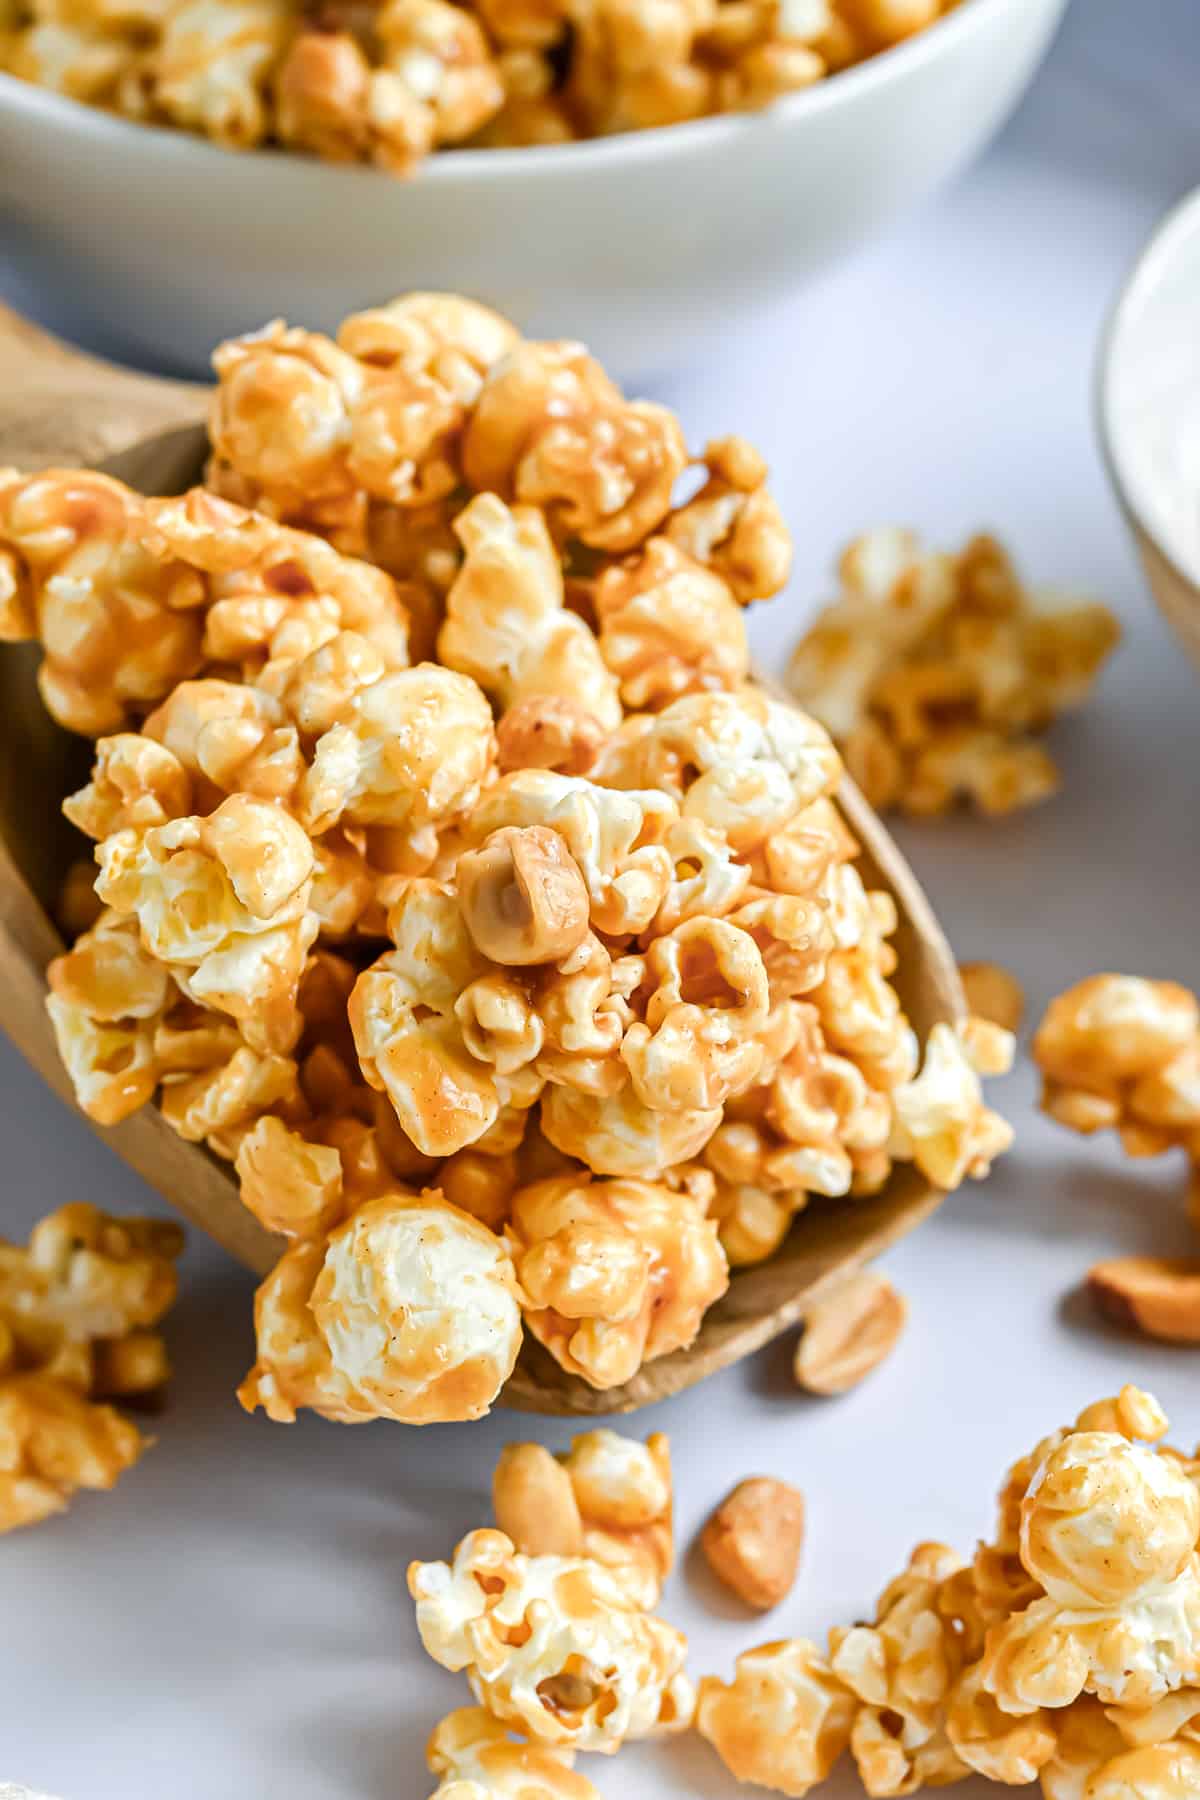 Peanut butter popcorn on a large wooden spoon.